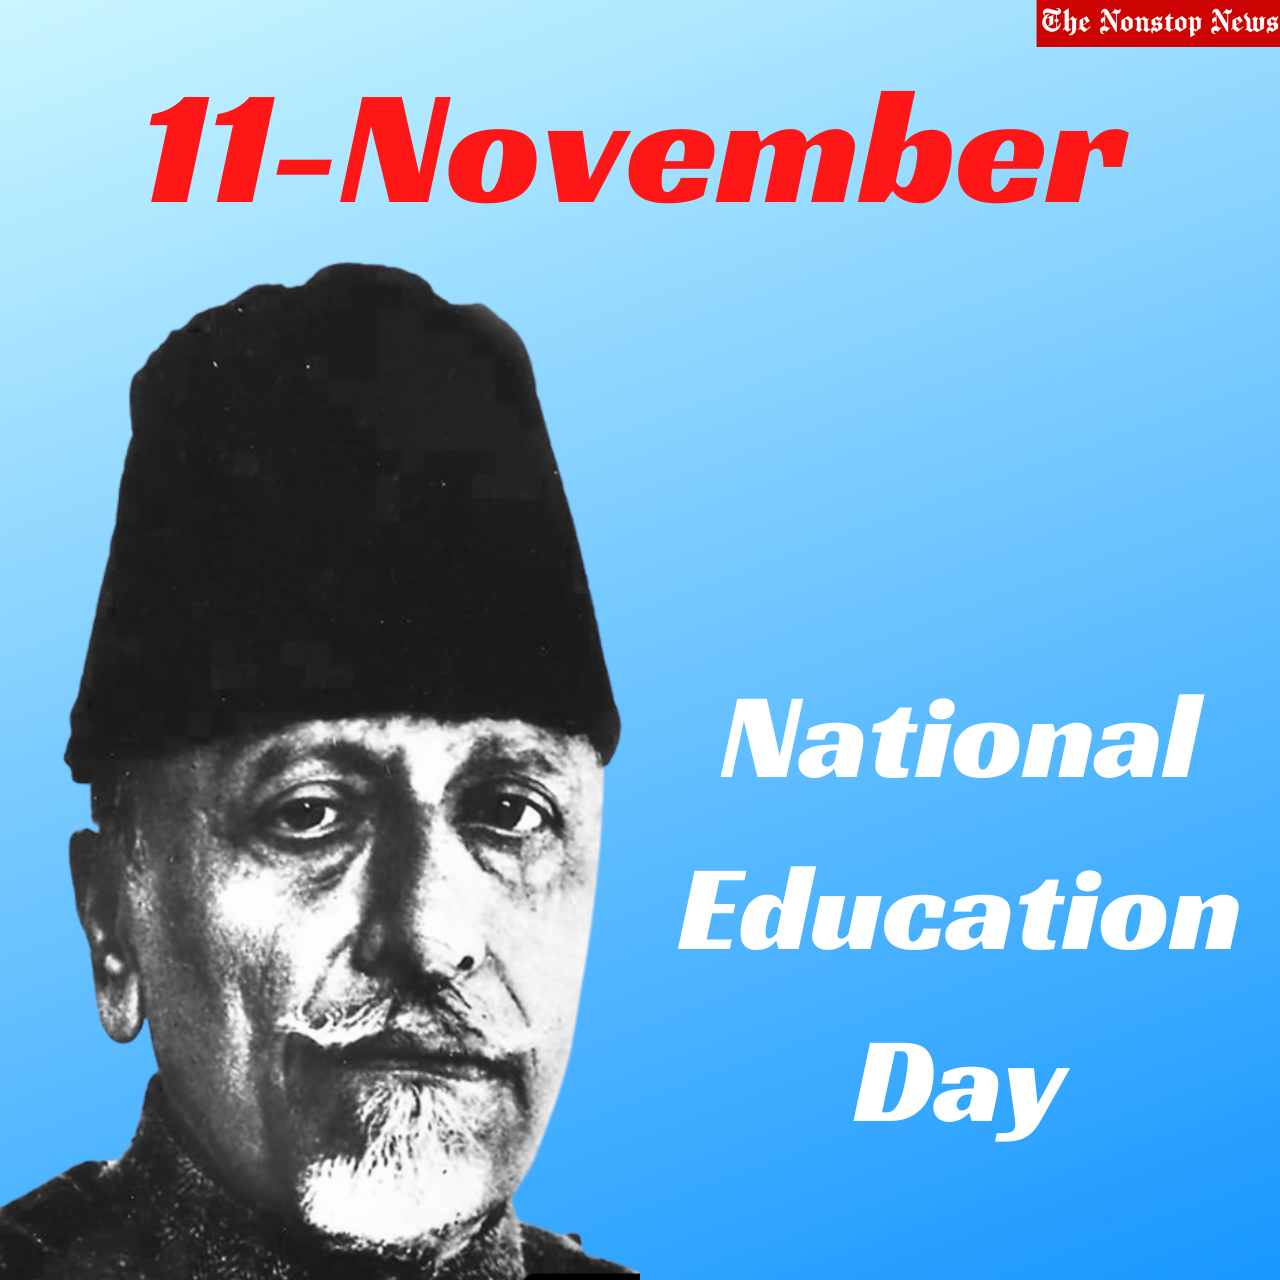 National Education Day 2022: Current Theme, Wishes, Posters, Drawings, Messages, Images, Quotes, Shayari and Greetings